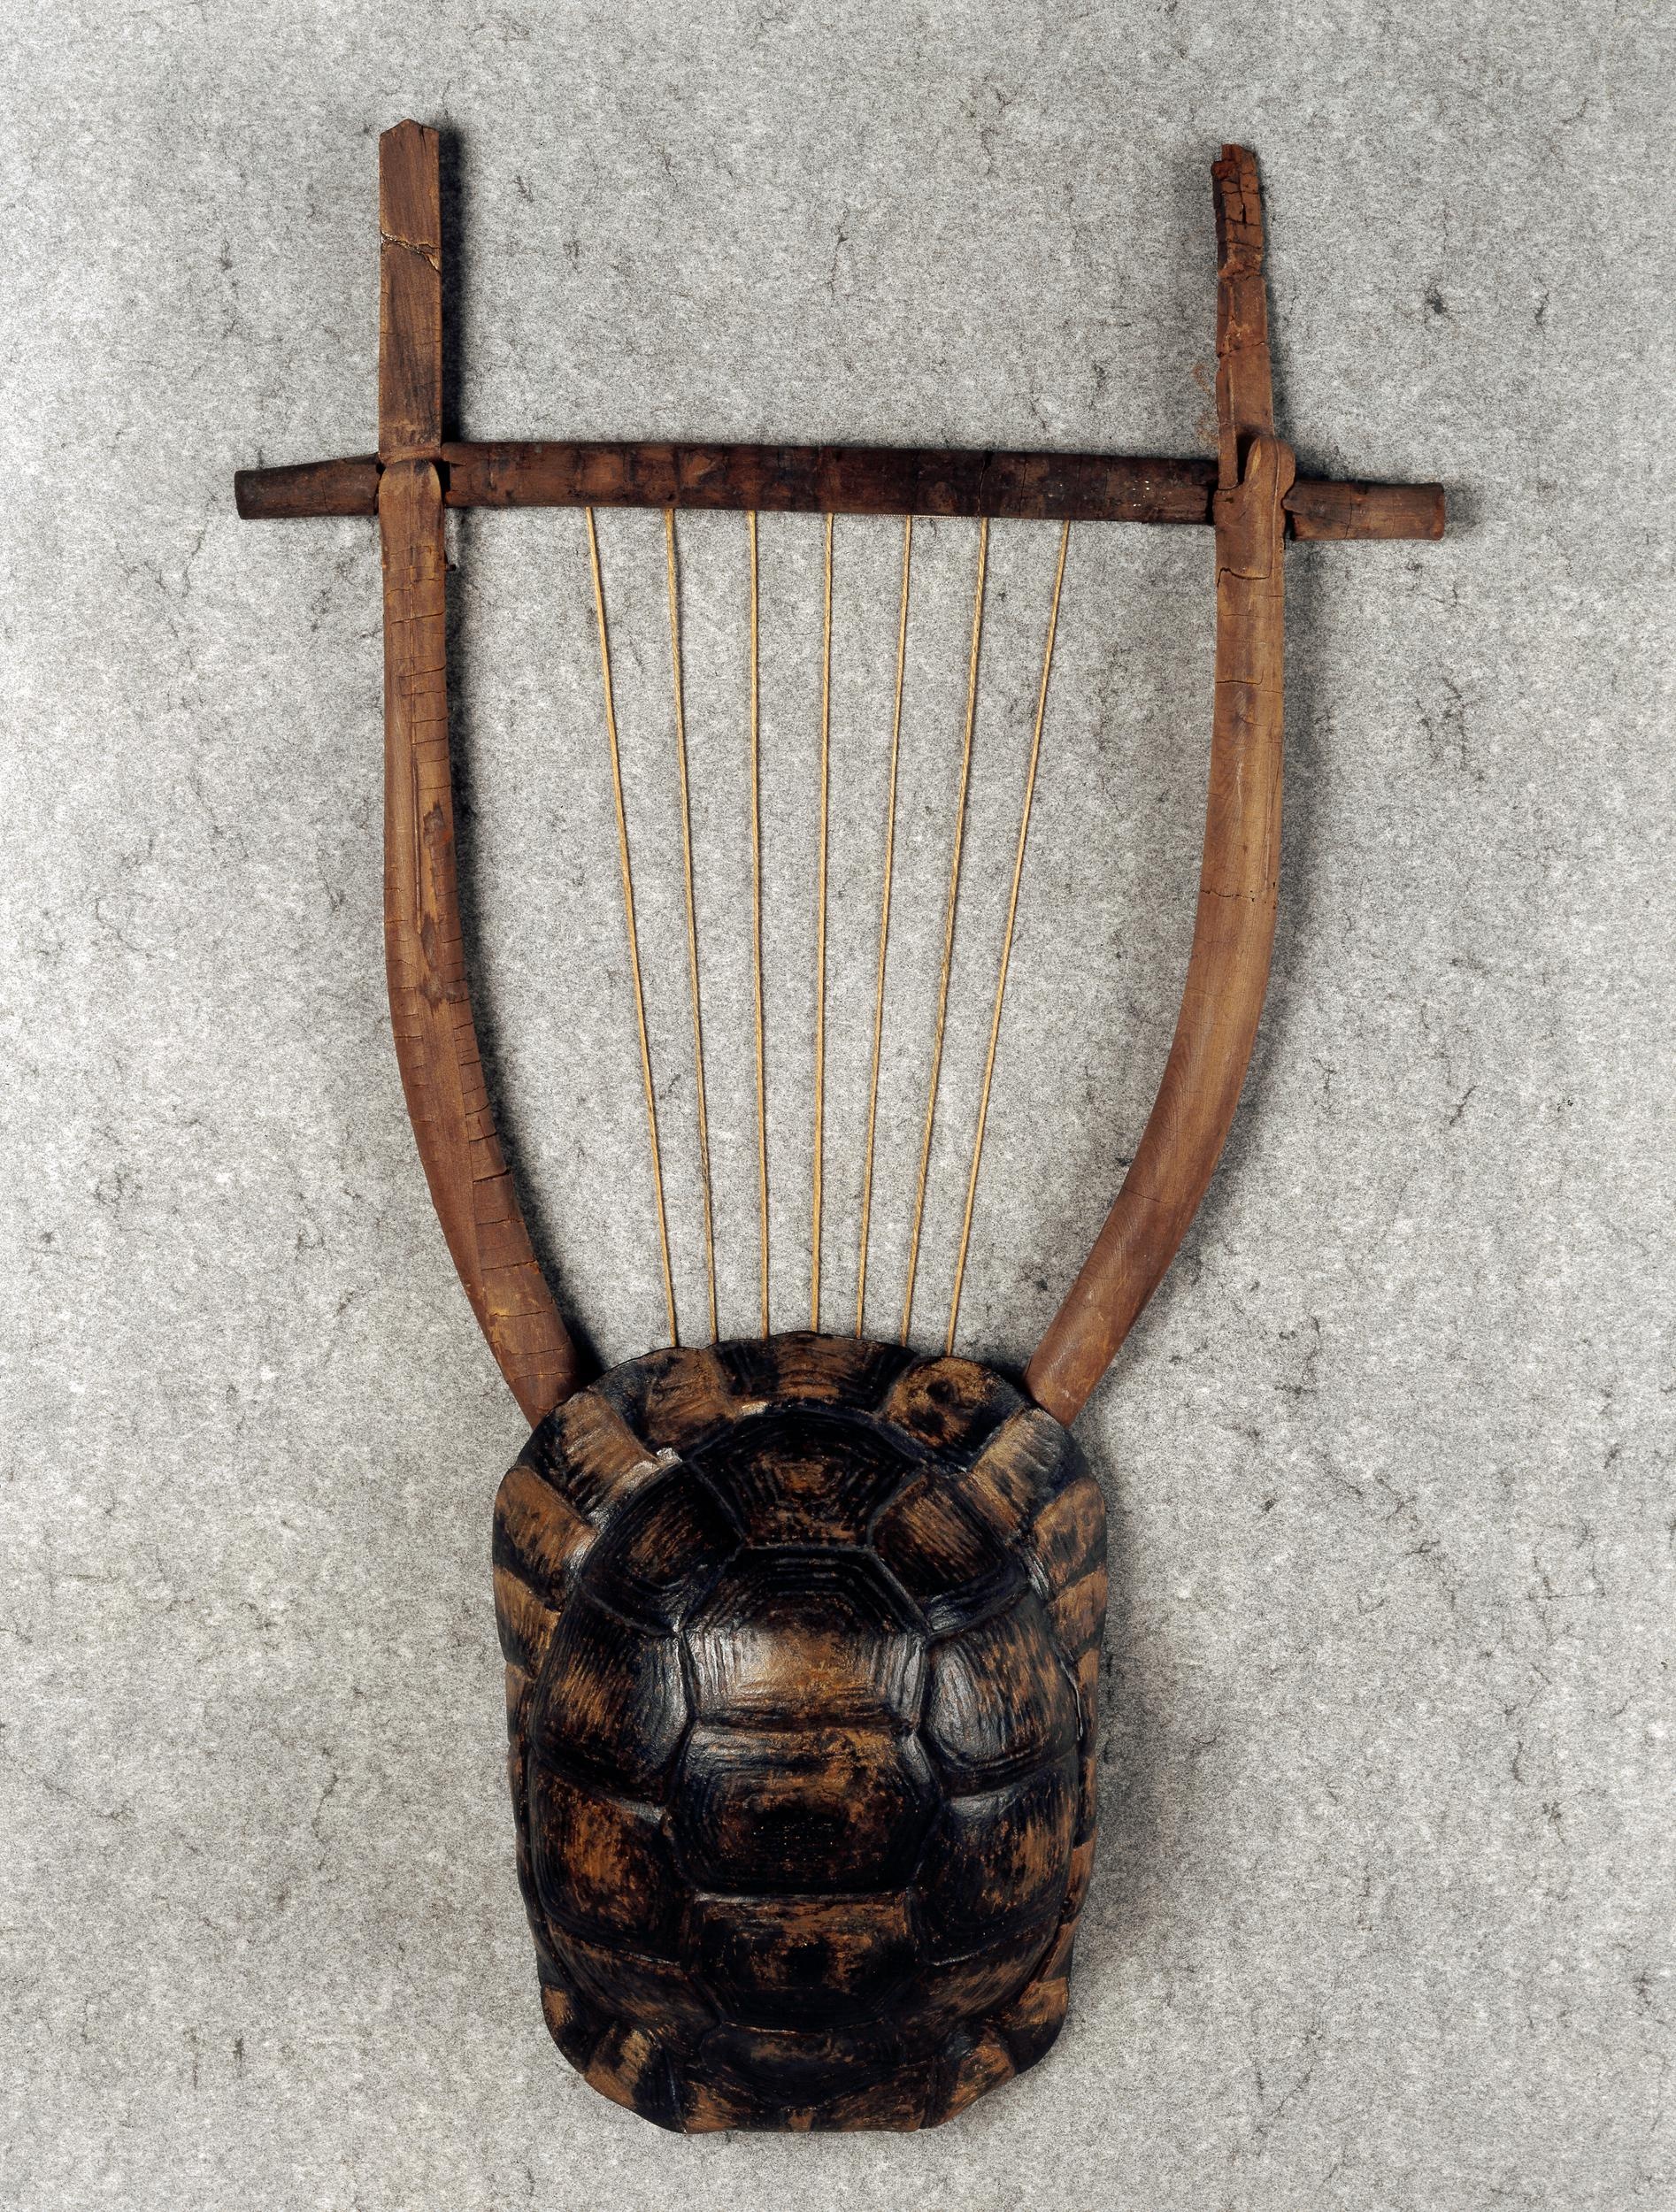 Lyre: A String Harp-Like Instrument, Made Using A Tortoise Shell, Archaeological Finding In Athens, Harps, Greeks. 1900x2500 HD Wallpaper.